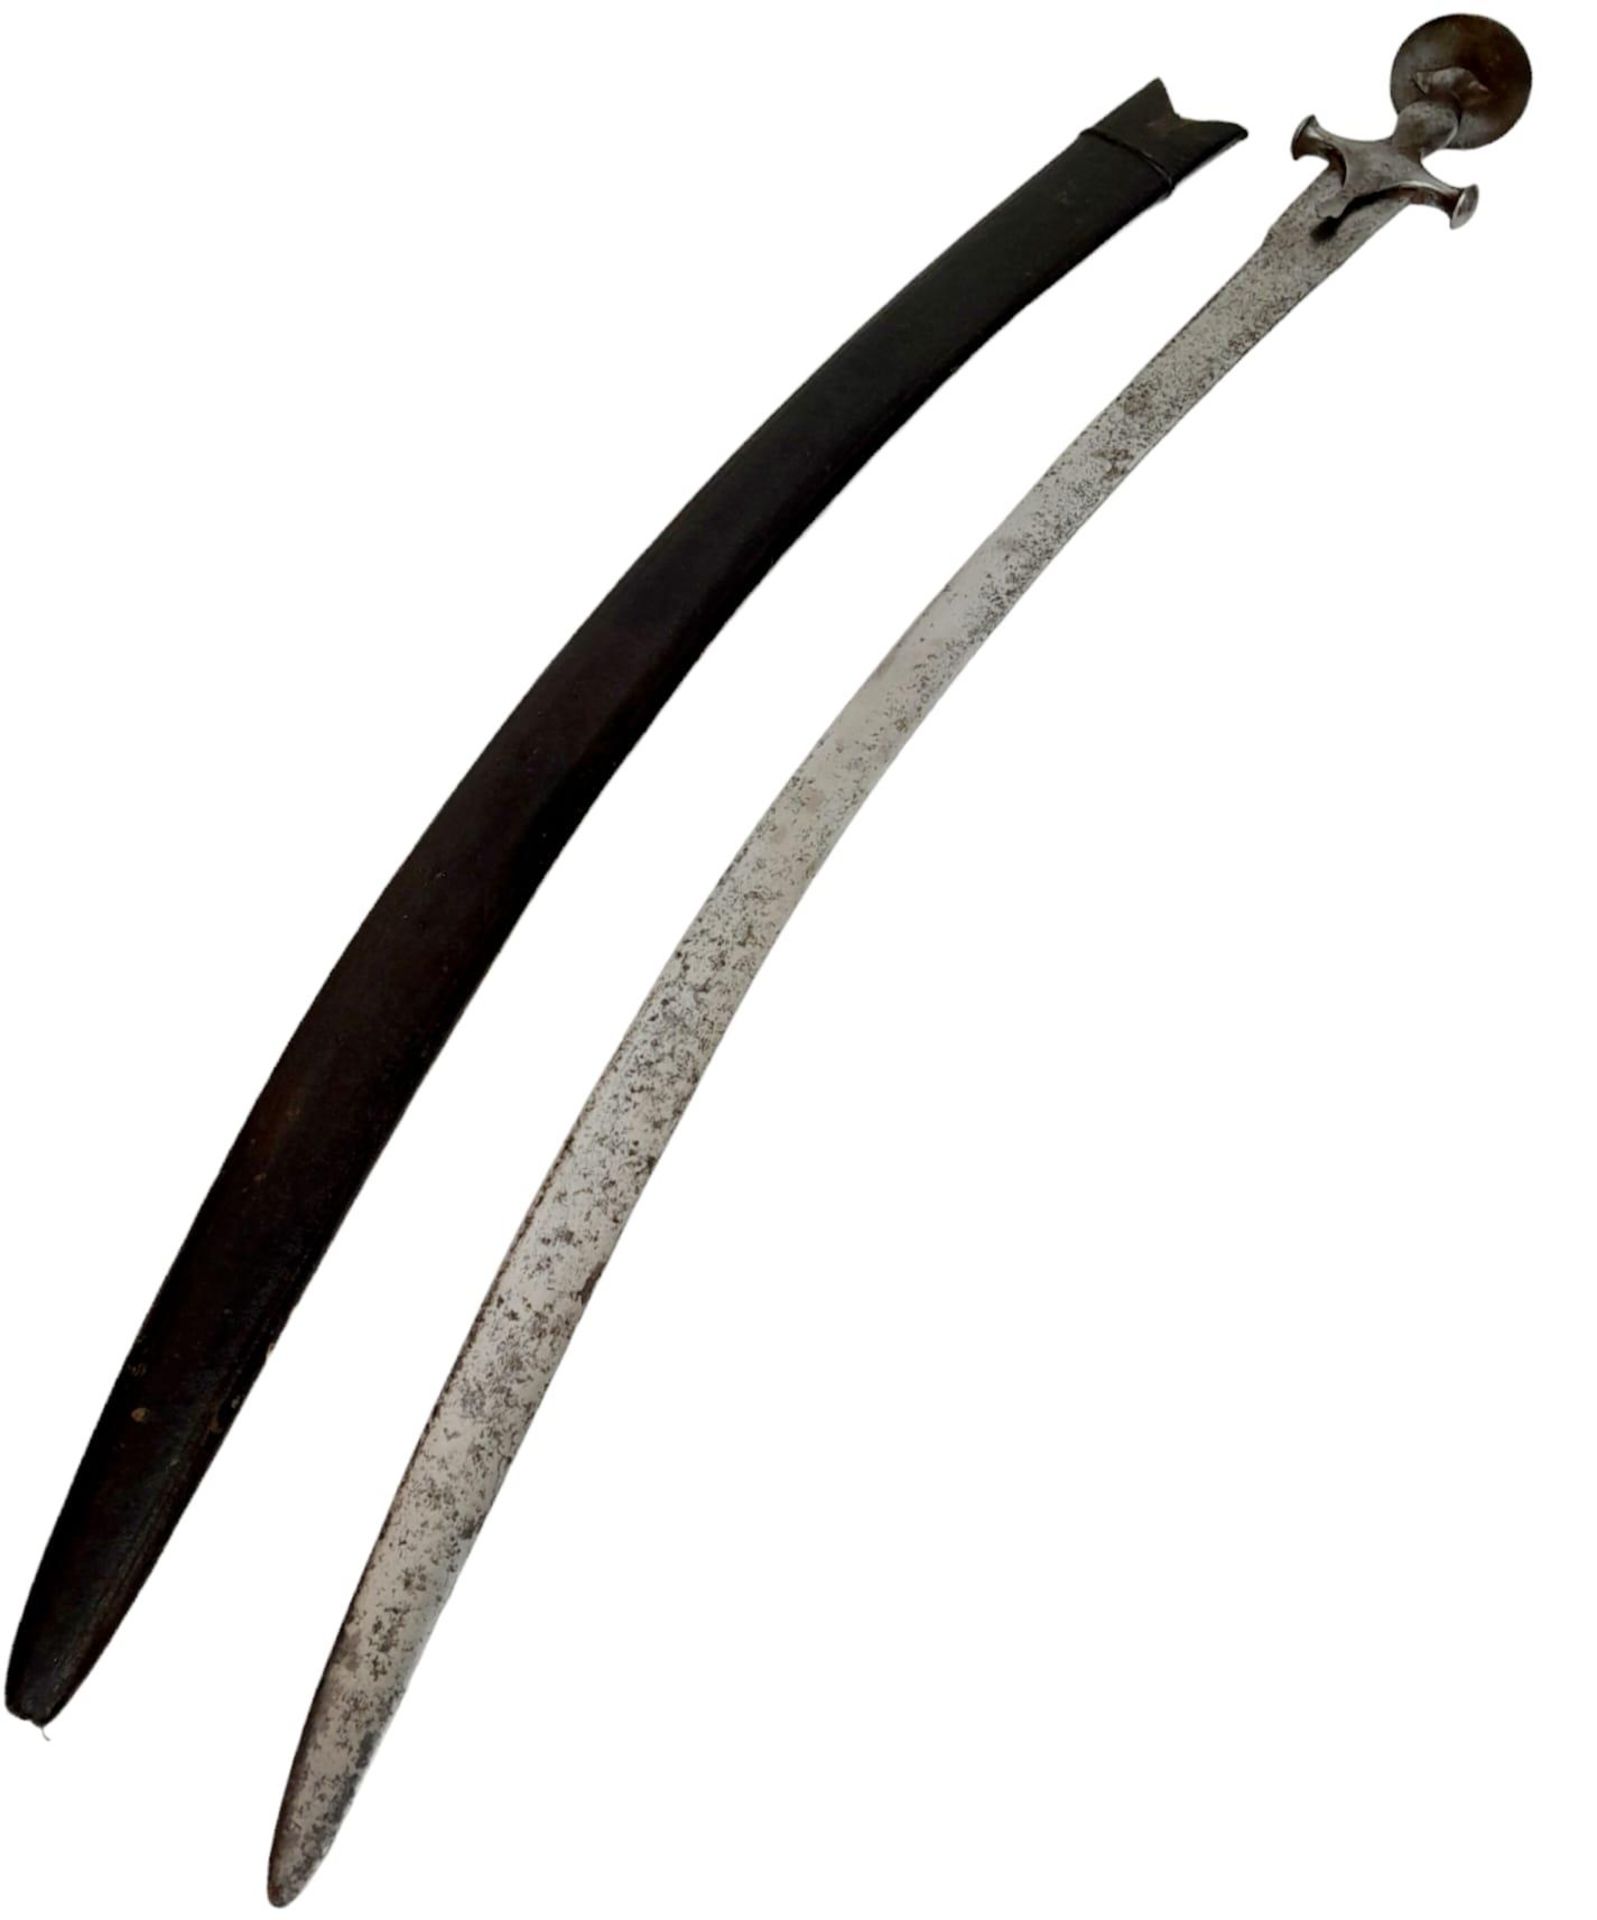 A Vintage Indian/Persian Tulwar Sword with Leather Scabbard. Iron Hilt with Cross Guard. 92cm